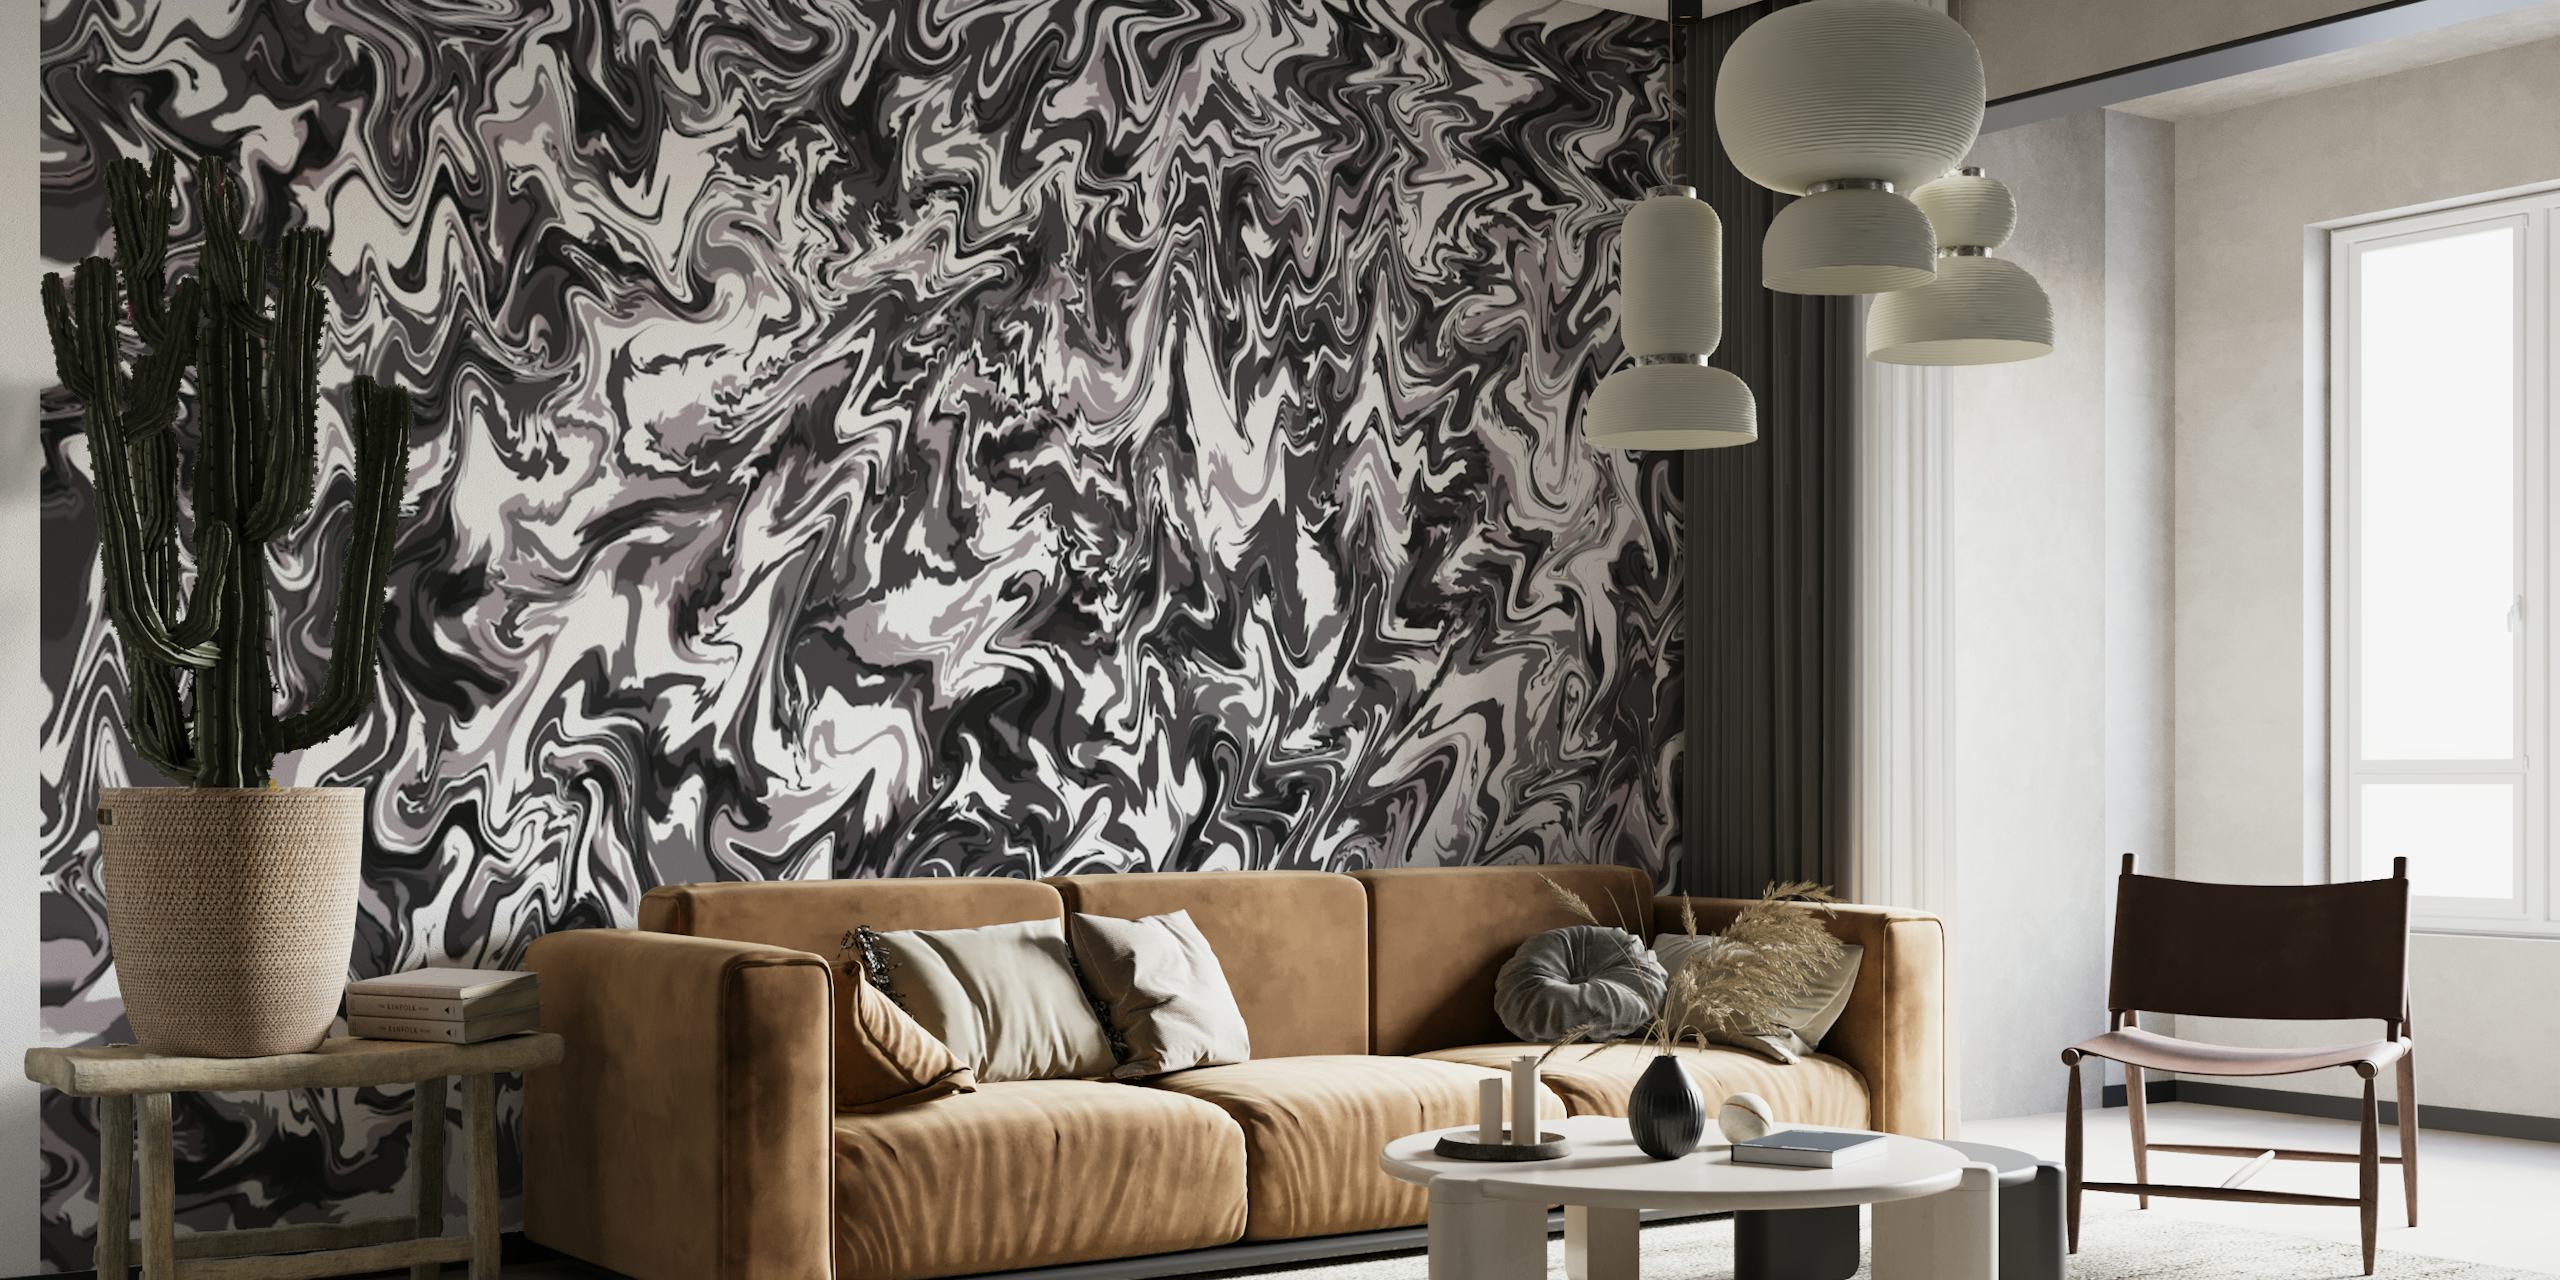 Black and White Pour Painting wallpaper